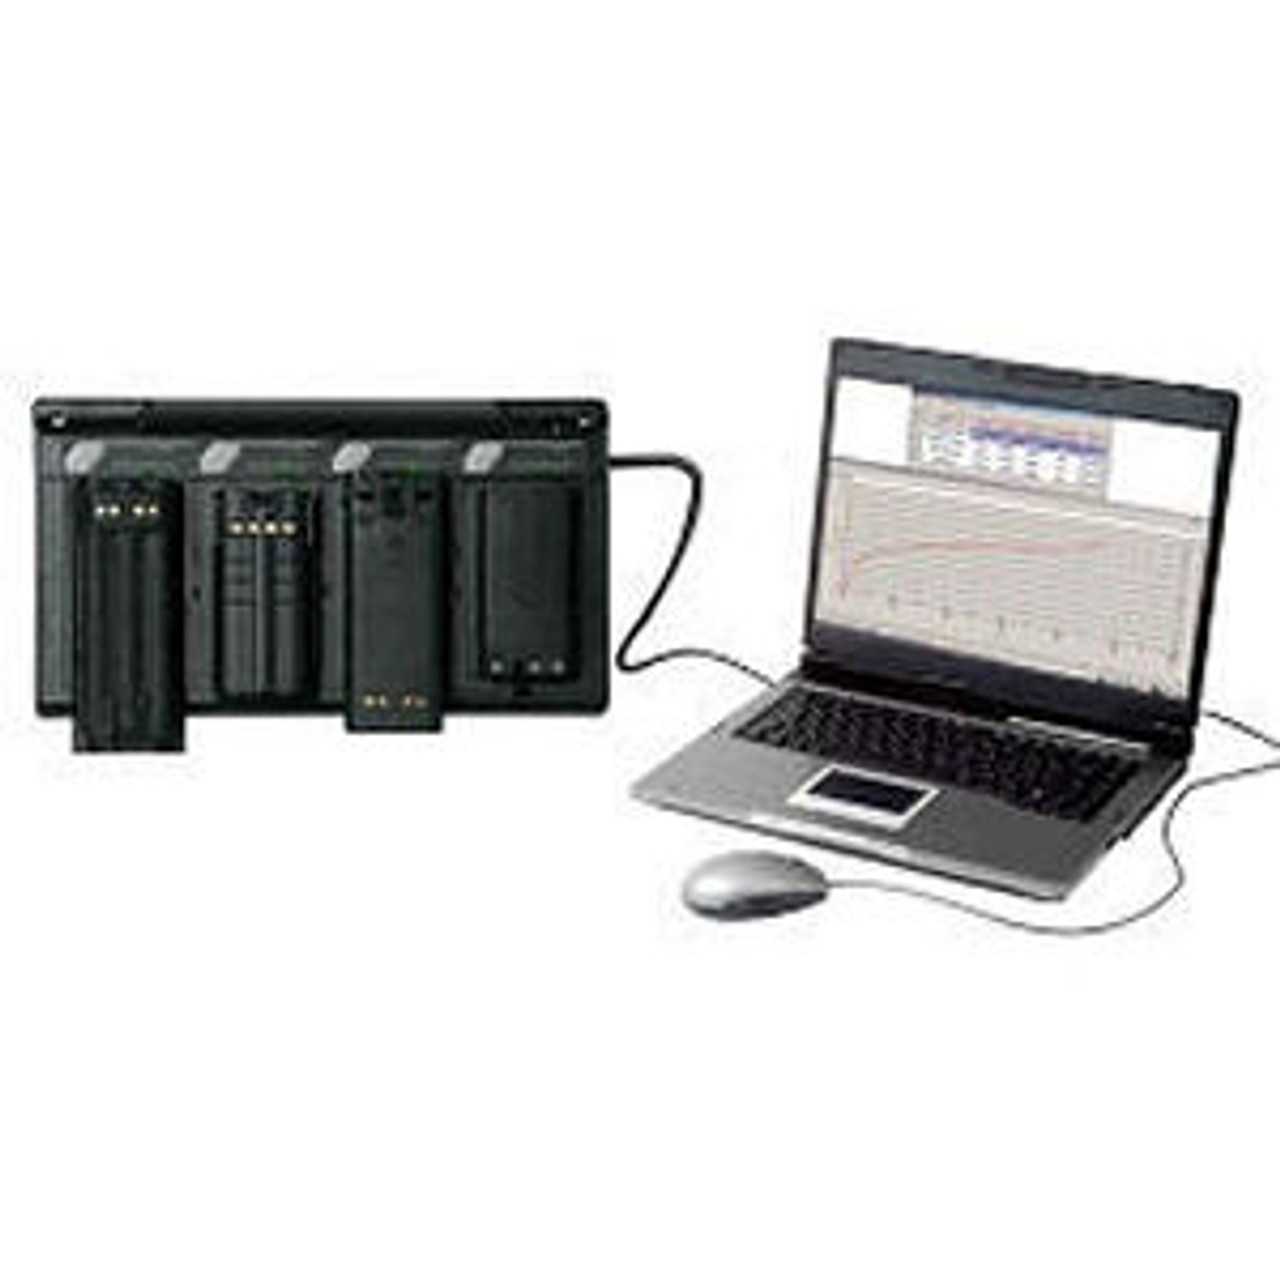 AdvanceTec 4-Slot Software Driven Monitoring System For ICOM IC-F41 Batteries